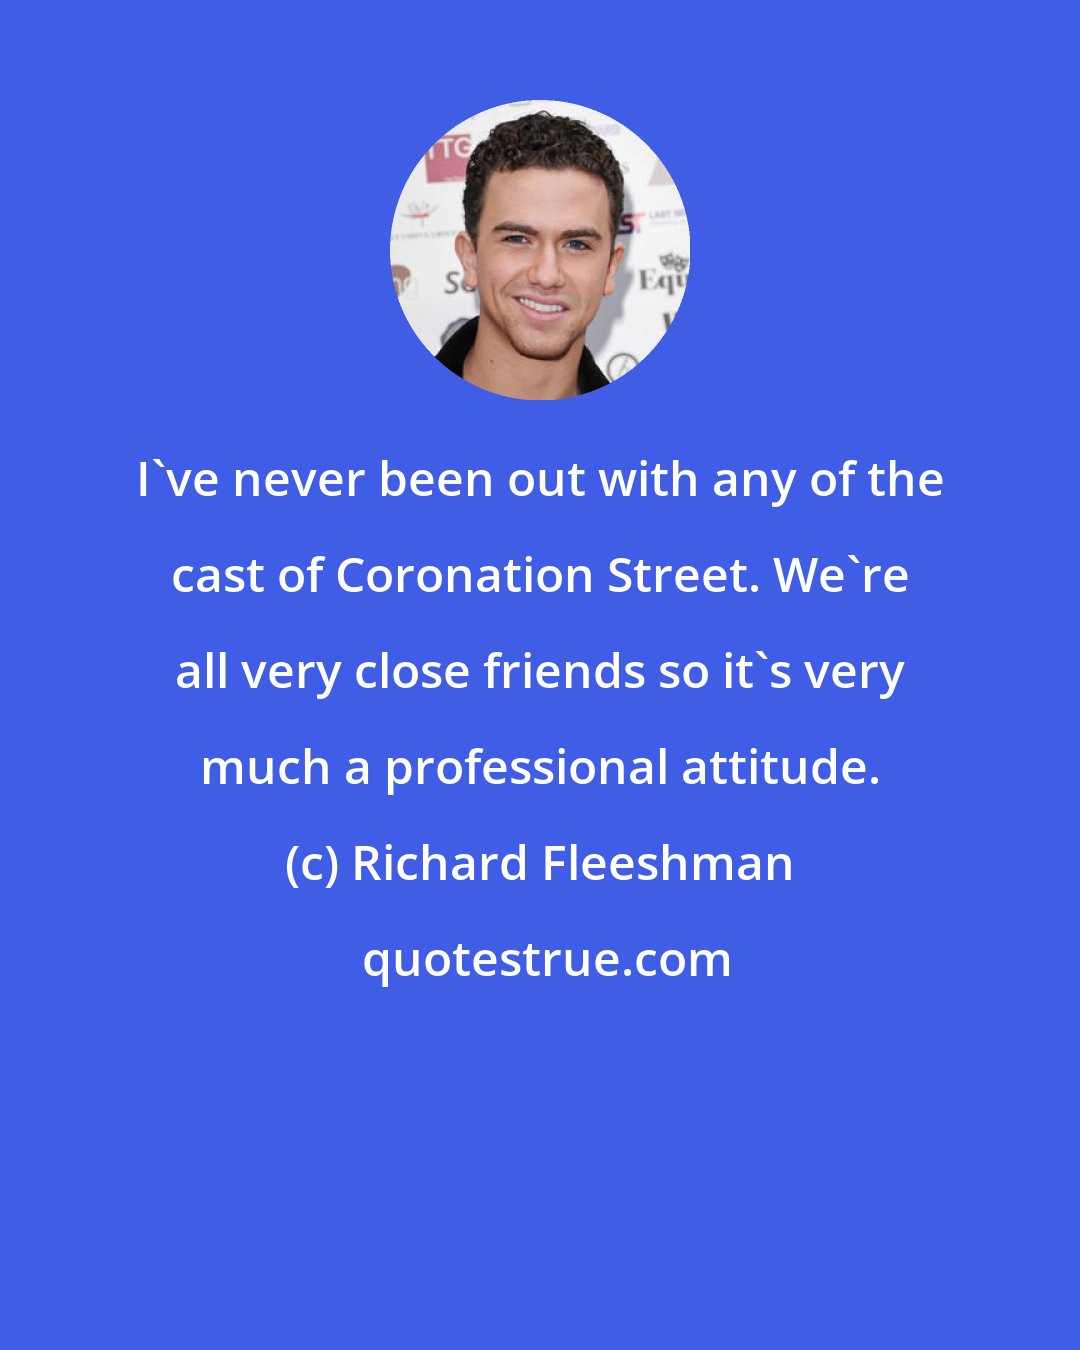 Richard Fleeshman: I've never been out with any of the cast of Coronation Street. We're all very close friends so it's very much a professional attitude.